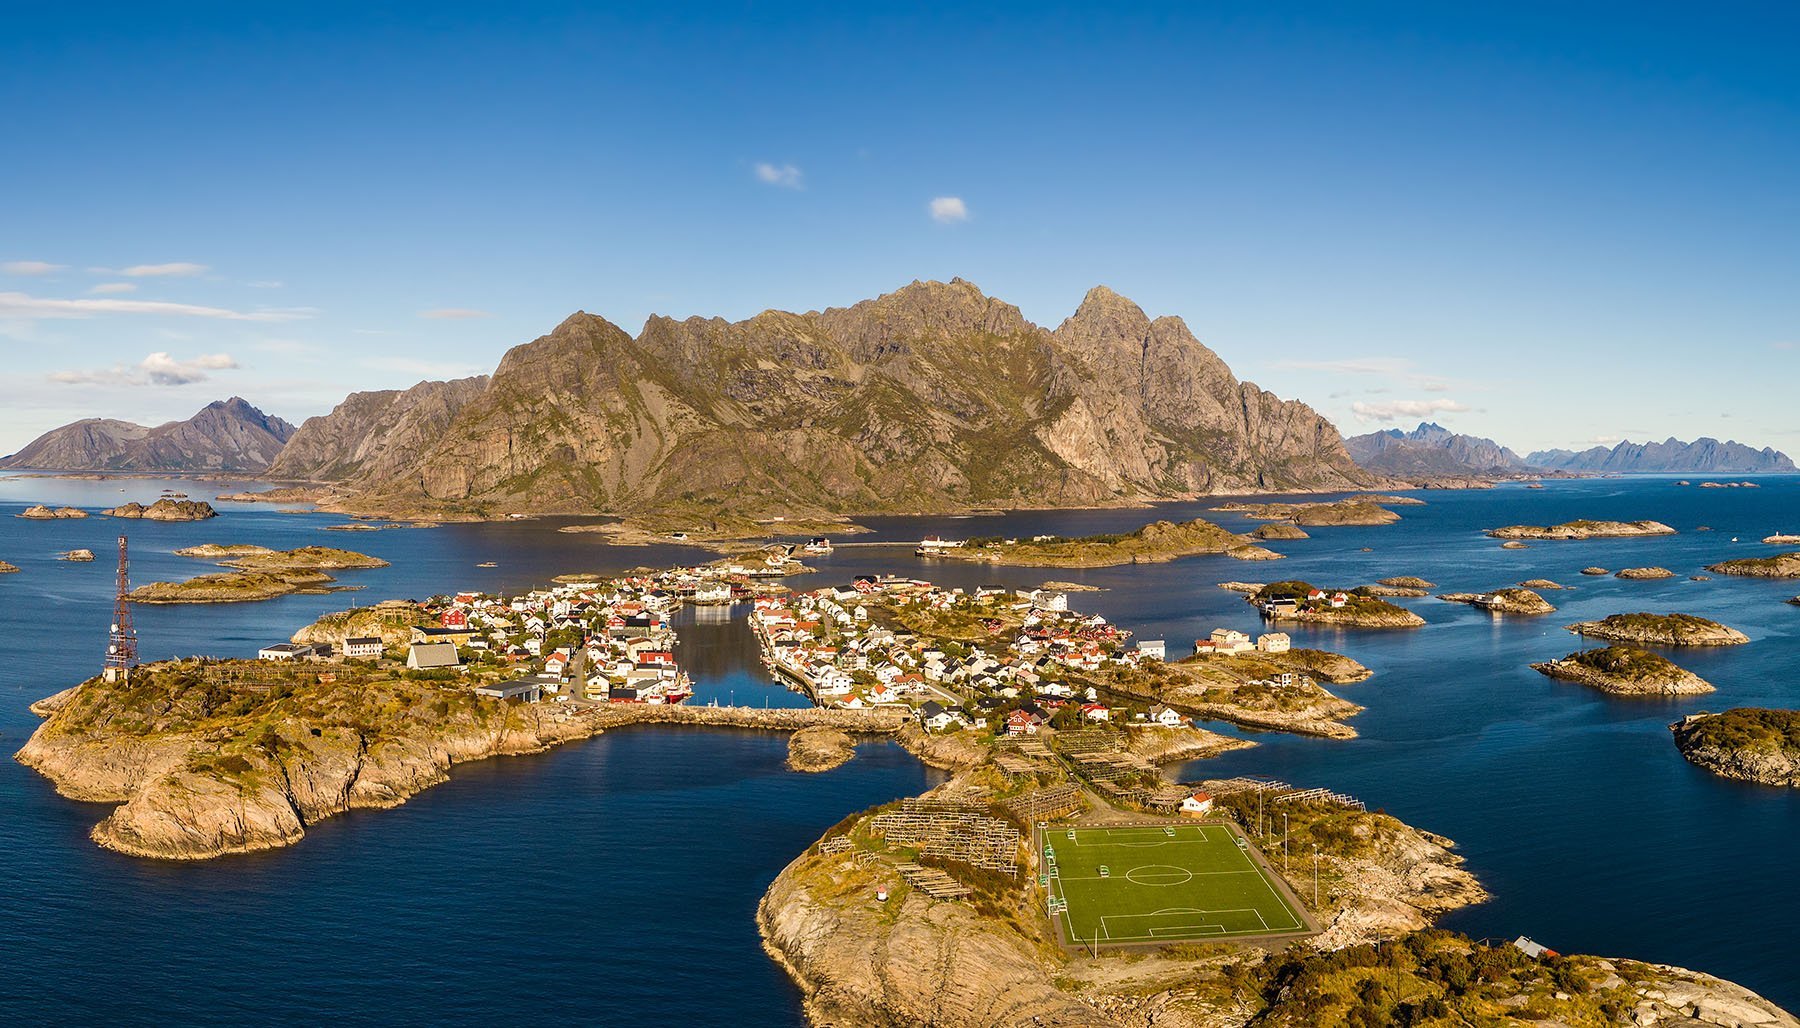 Iconic football pitch in Lofoten, Norway